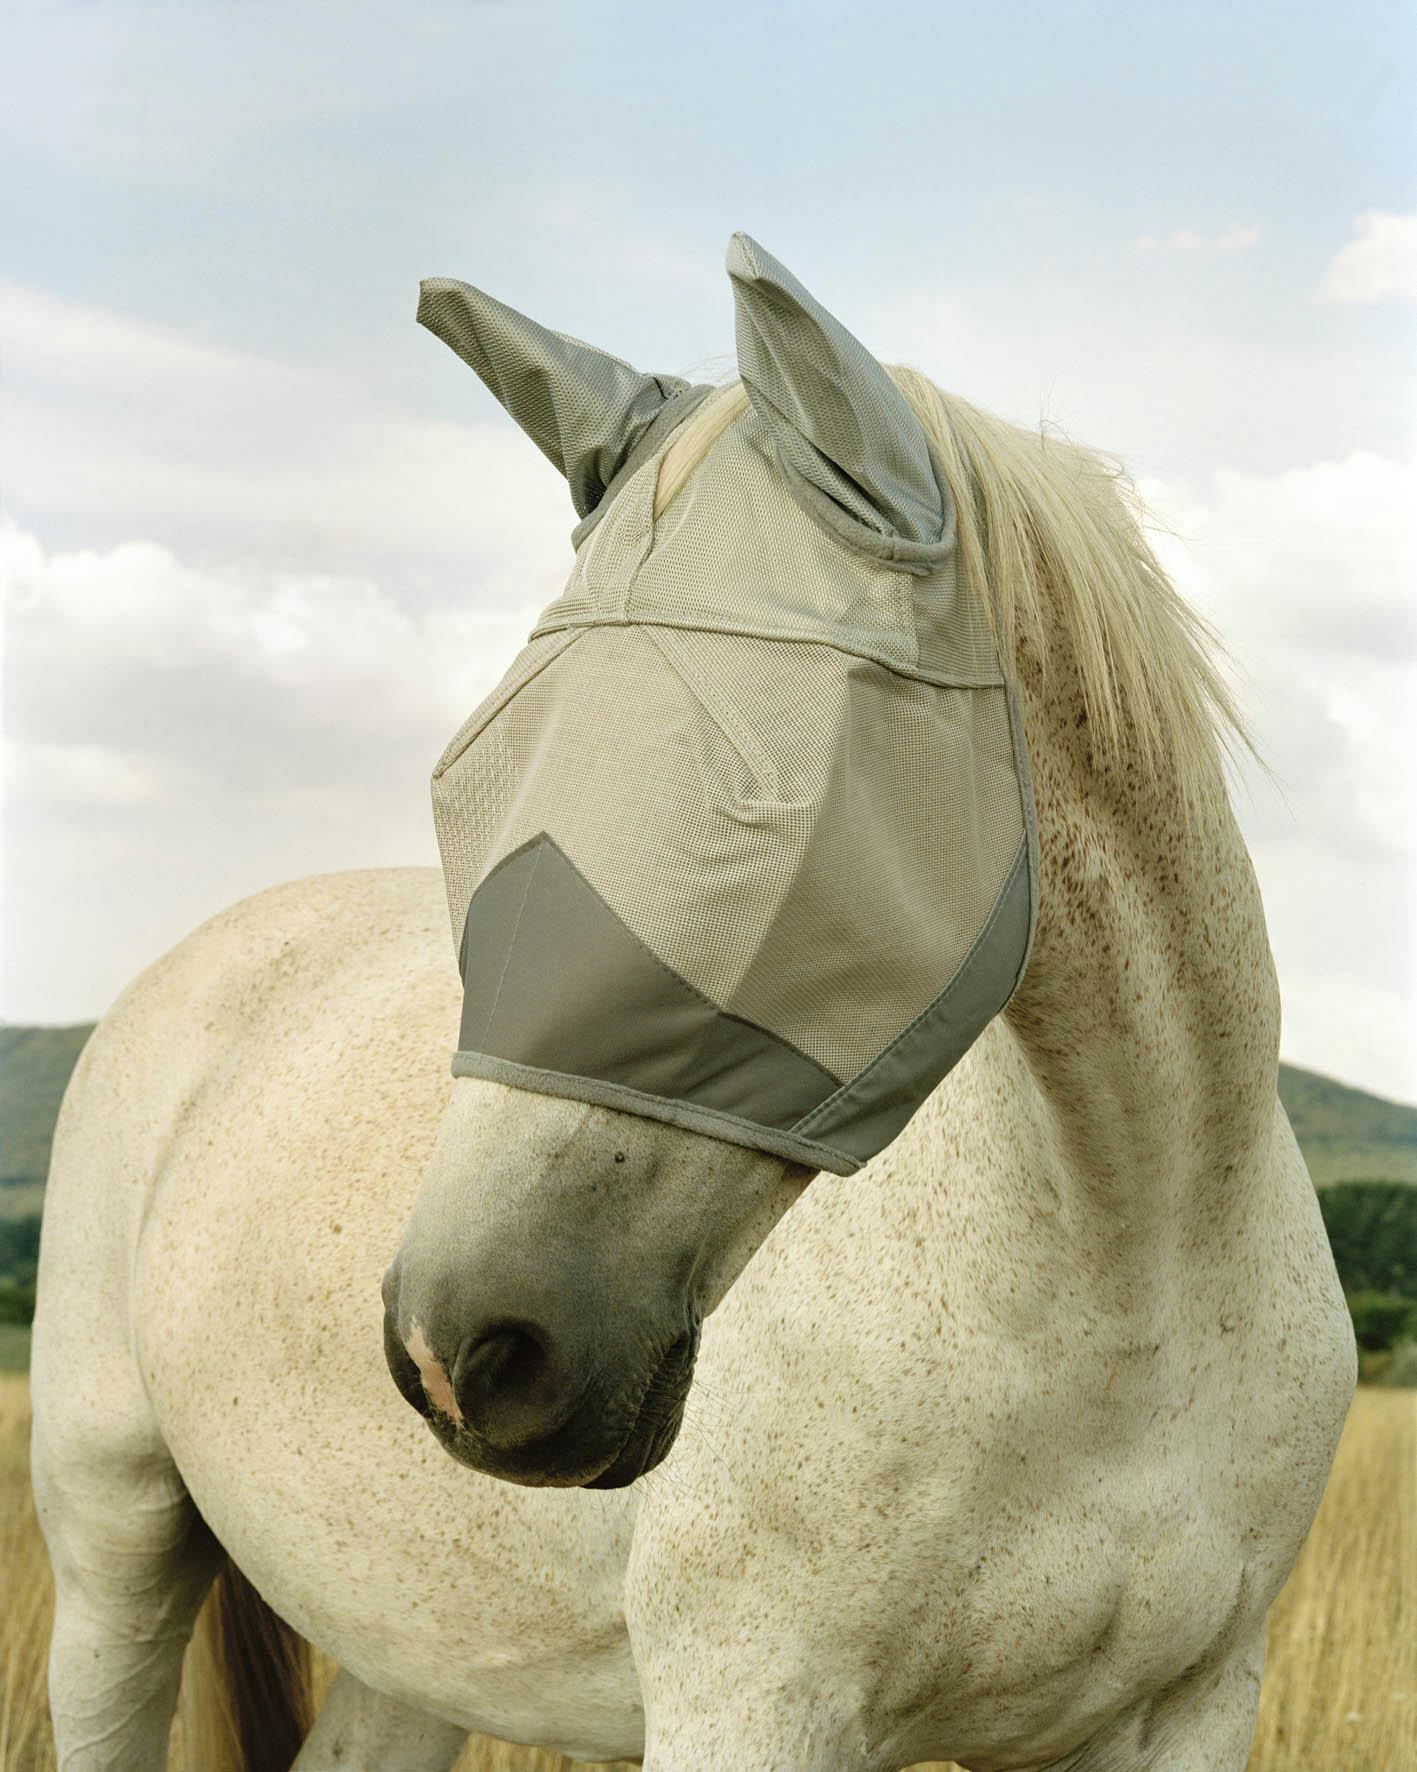 Foam Editions: Kata Geibl - The Race Horse, From the series There is Nothing New Under the Sun, 2021